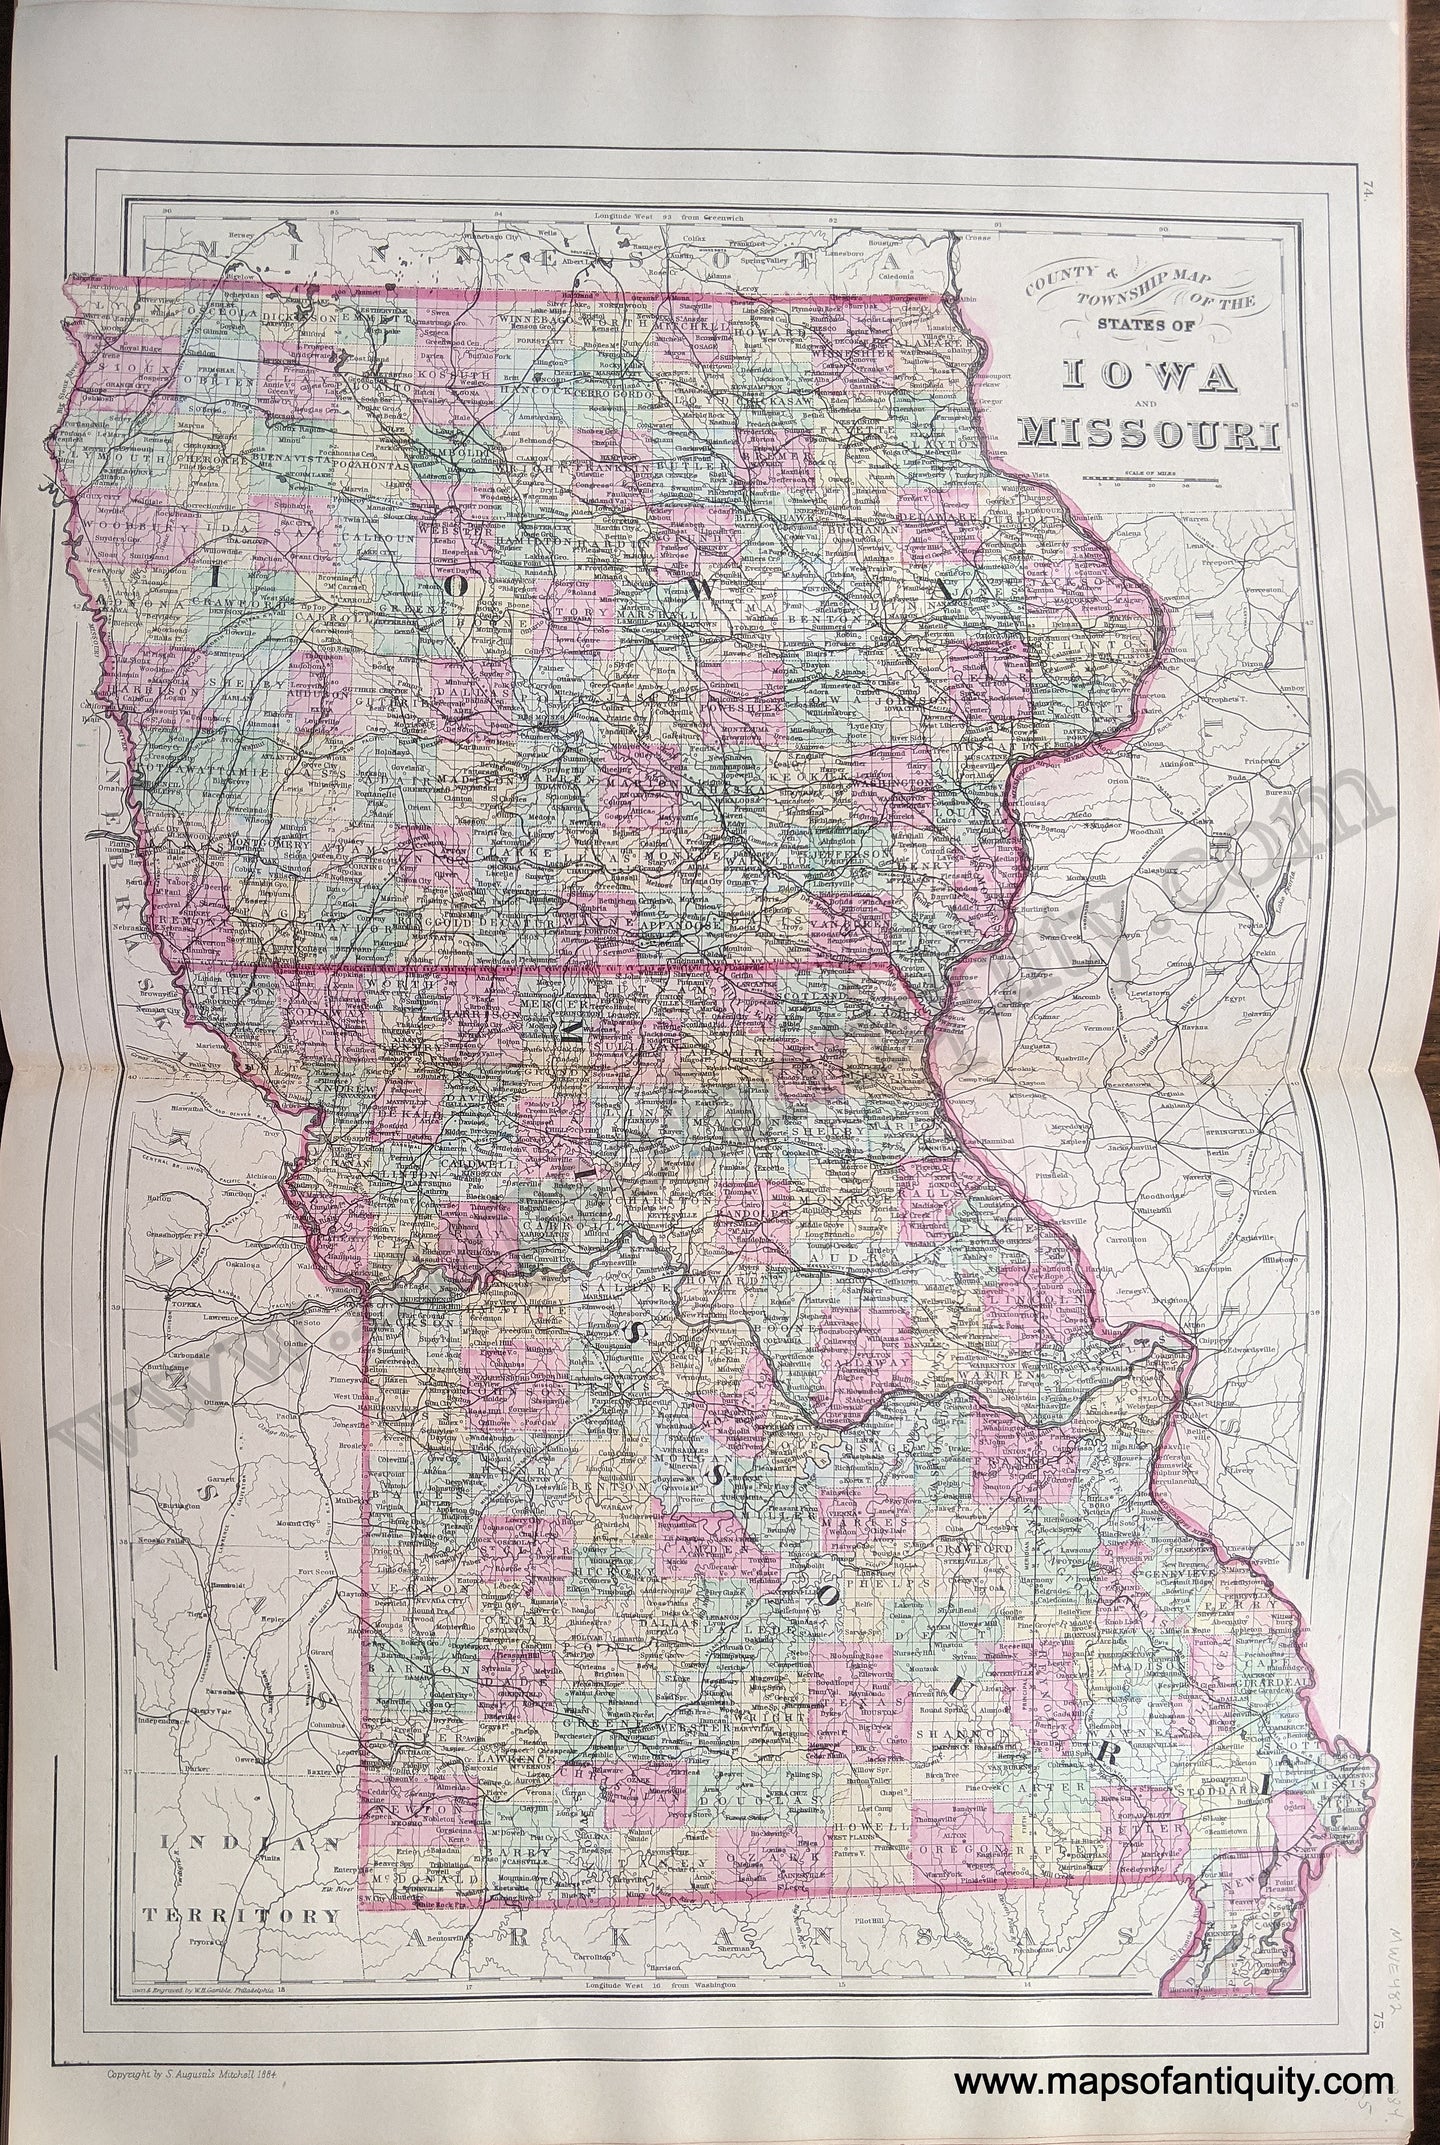 Antique-Hand-Colored-Map-Double-sided-sheet-with-multiple-maps:-Centerfold---County-and-Township-Map-of-the-States-of-Iowa-and-Missouri-/-Map-of-St.-Louis-on-reverse-United-States-Midwest-1884-Mitchell-Maps-Of-Antiquity-1800s-19th-century